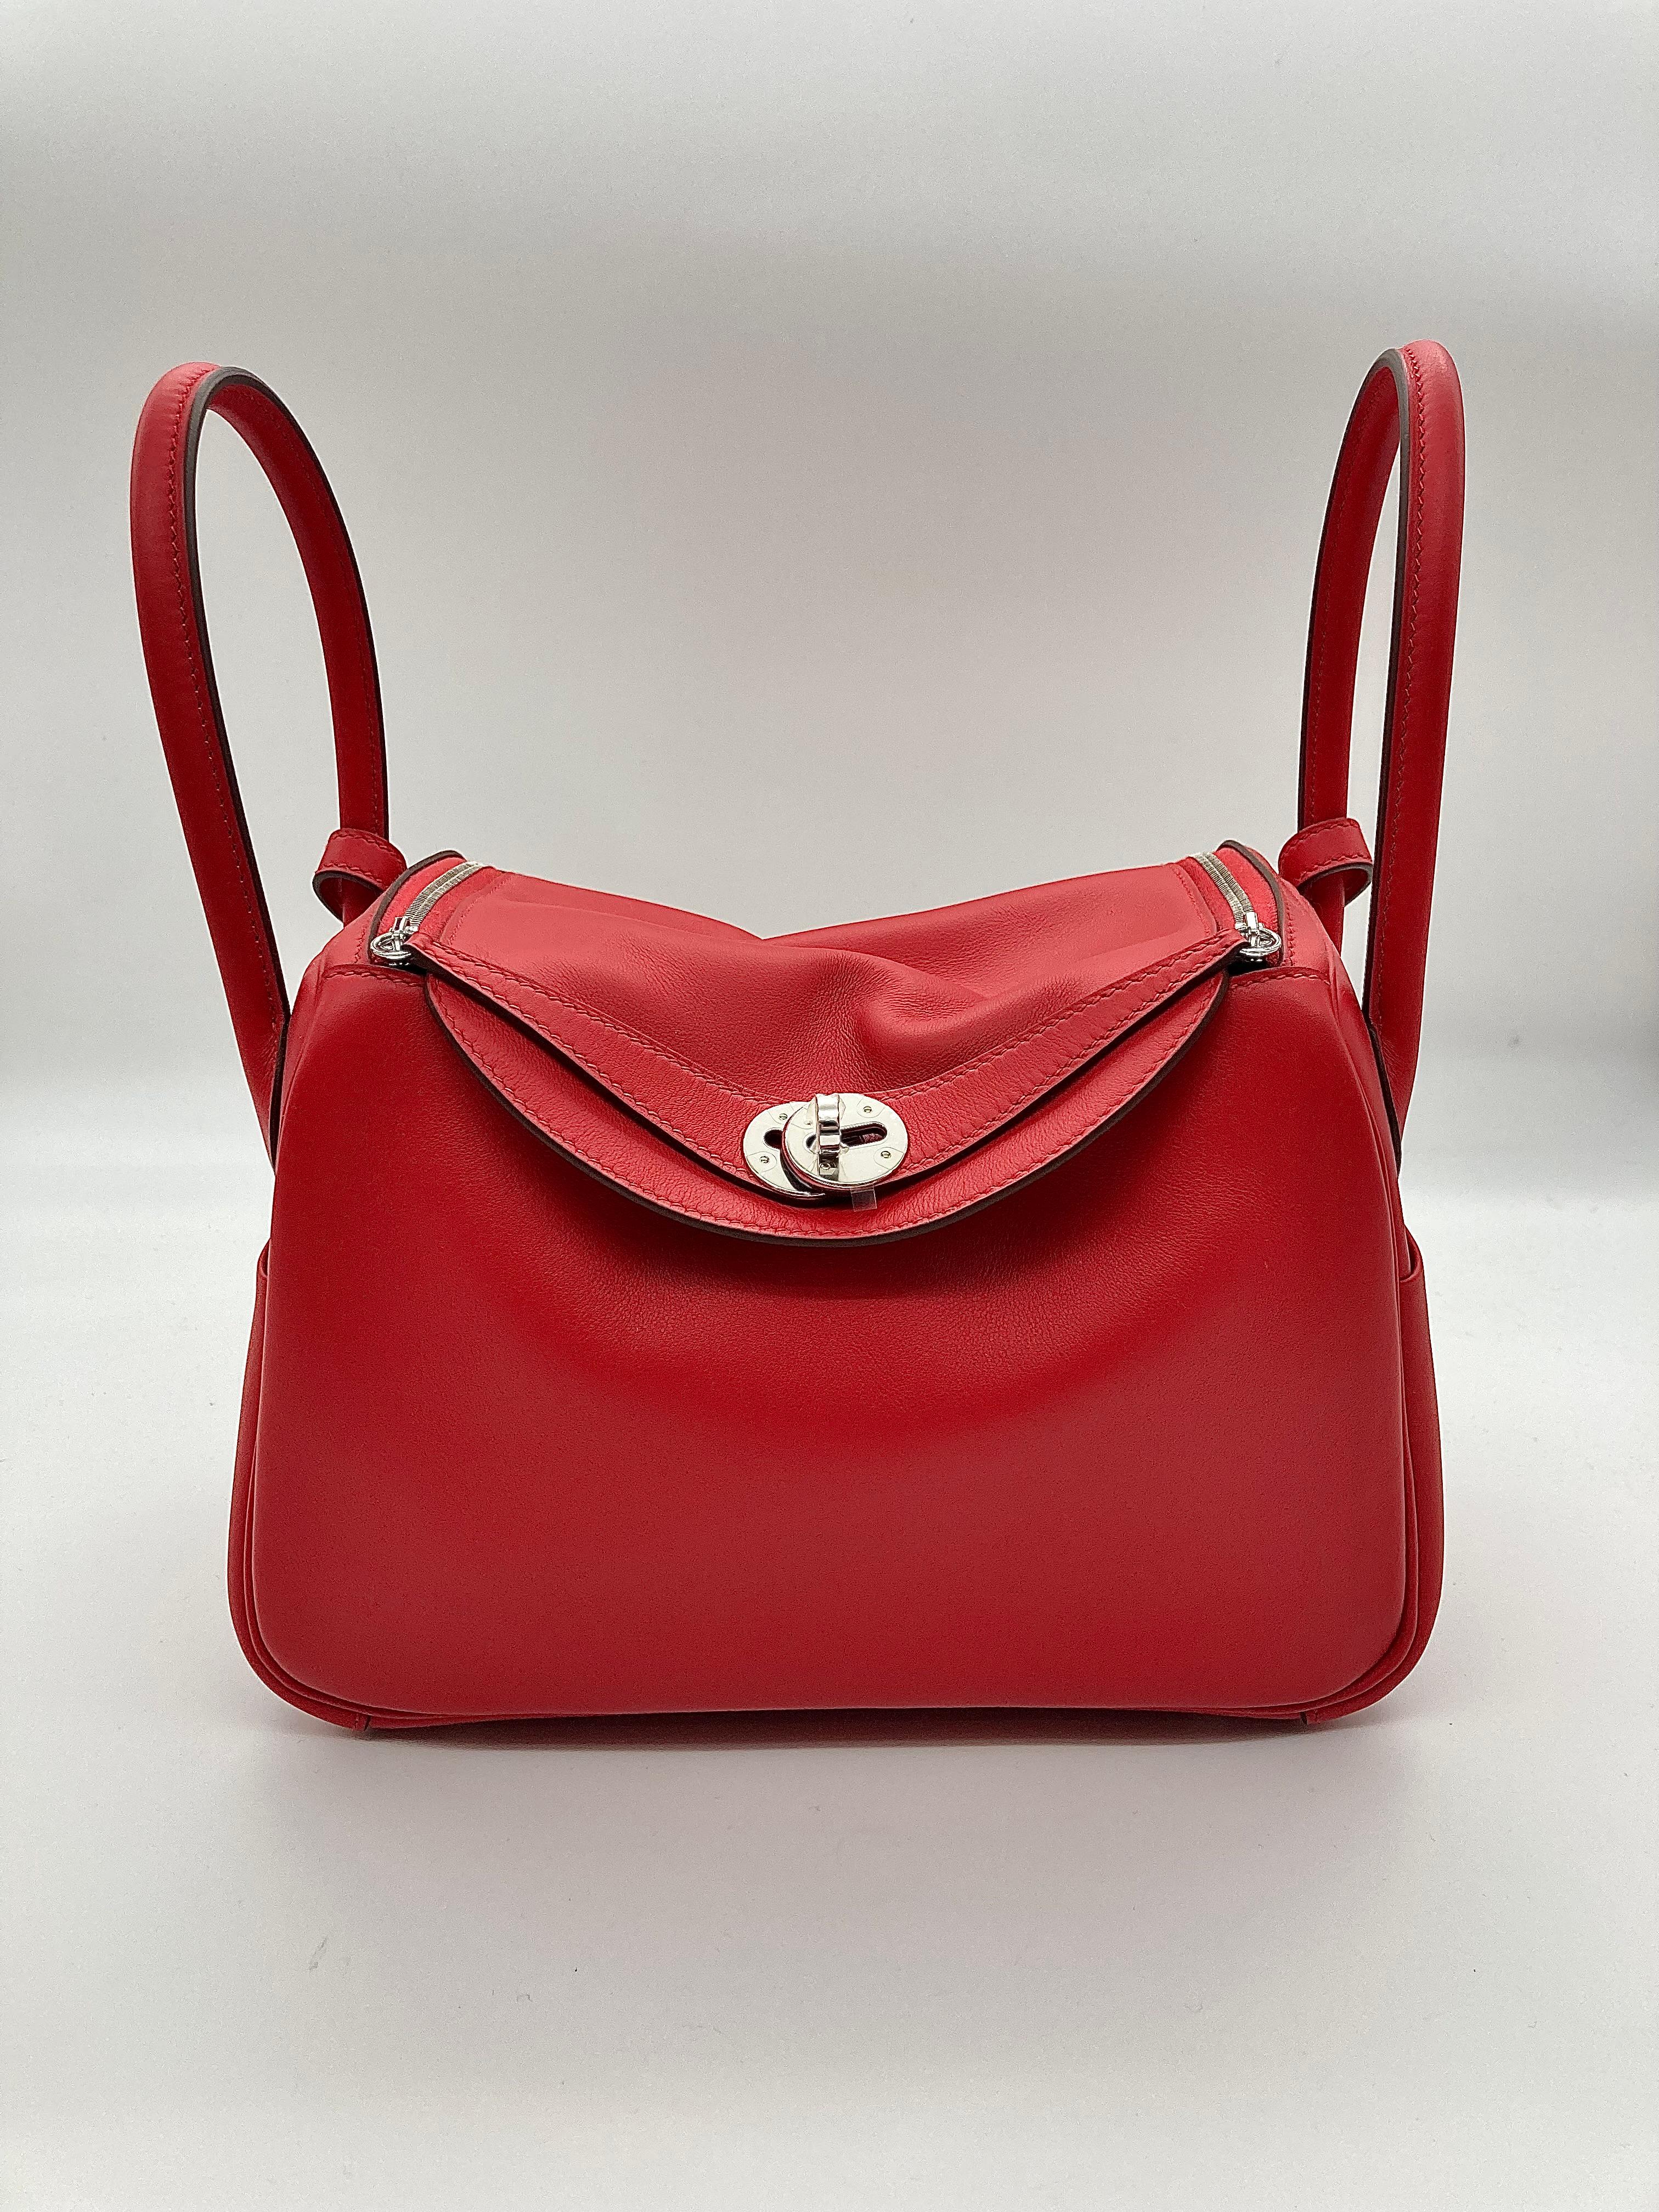 Hermes Lindy 26 Verso Swift Calfskin Rouge de Coeur / Rouge Piment Palladium Hardware

Condition: New 
Material: Calfskin Leather
Measurements: (L)10.5in. x (W)5in. x (H)6.5in. 
Hardware: Palladium plated 

Comes with full original